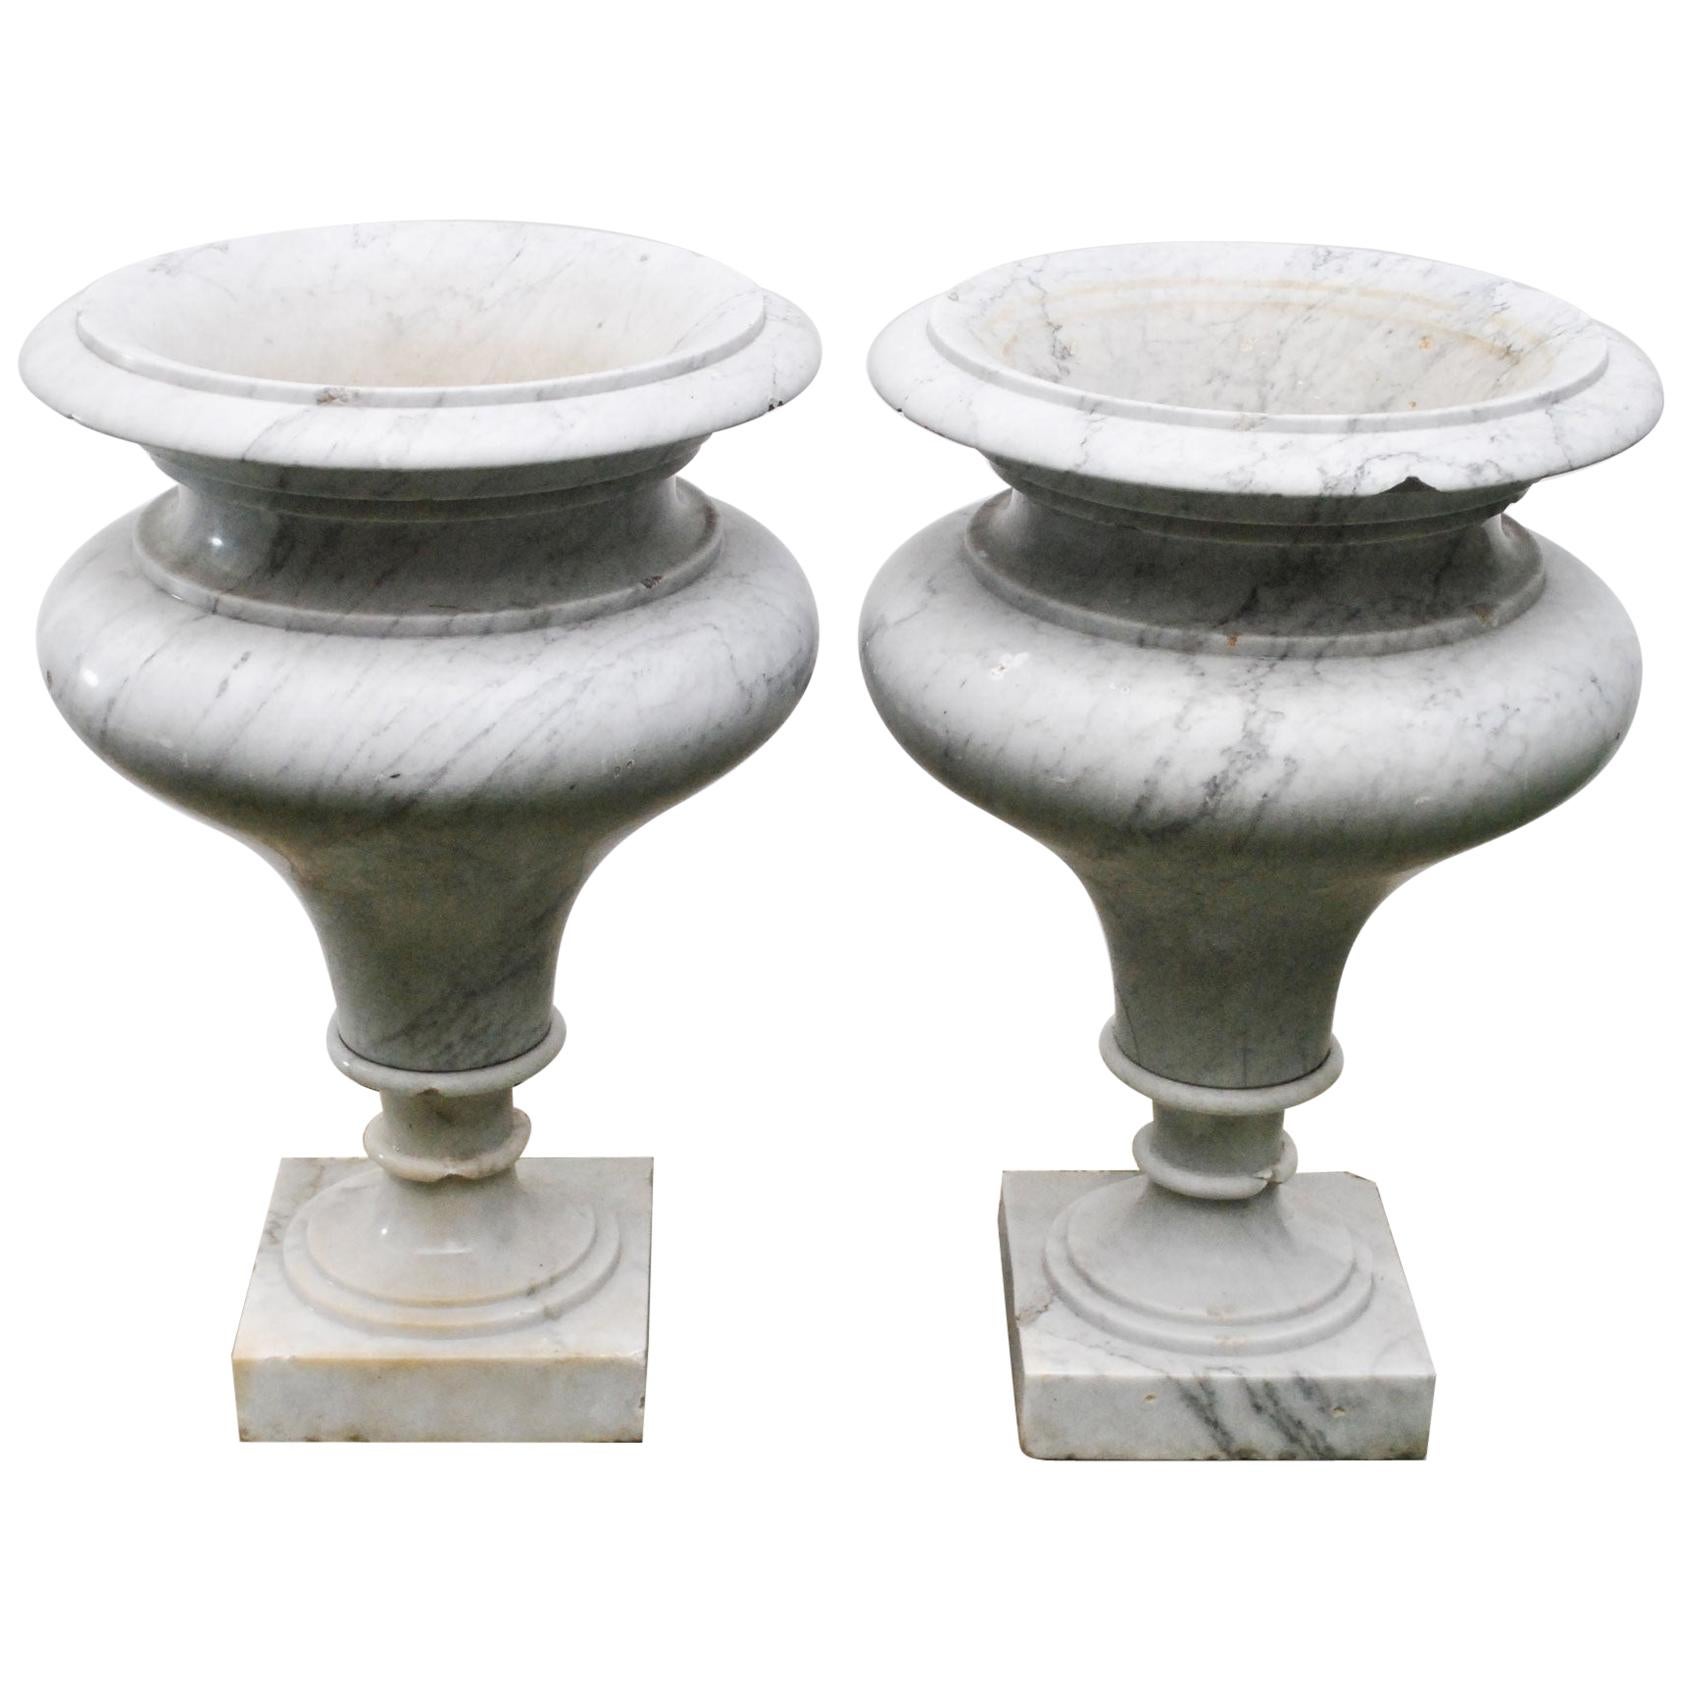 Elegant Pair of Large Carrara Marble Vases, Period Early 20th Century For Sale